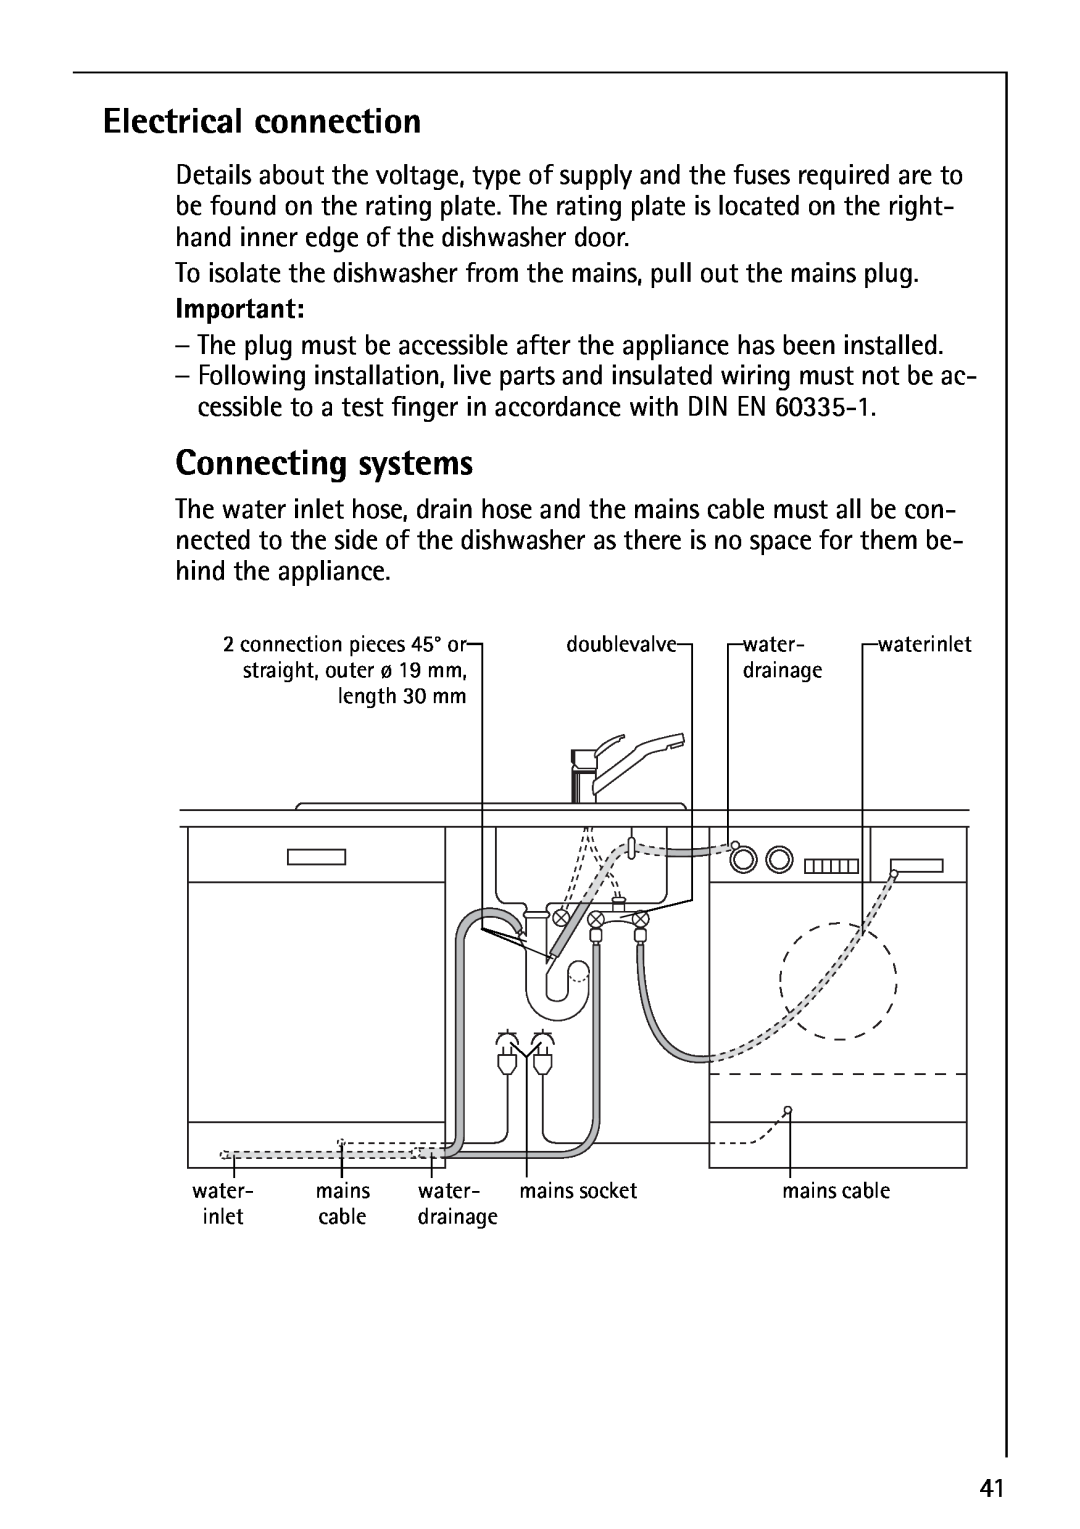 AEG 44080 I manual Electrical connection, Connecting systems 